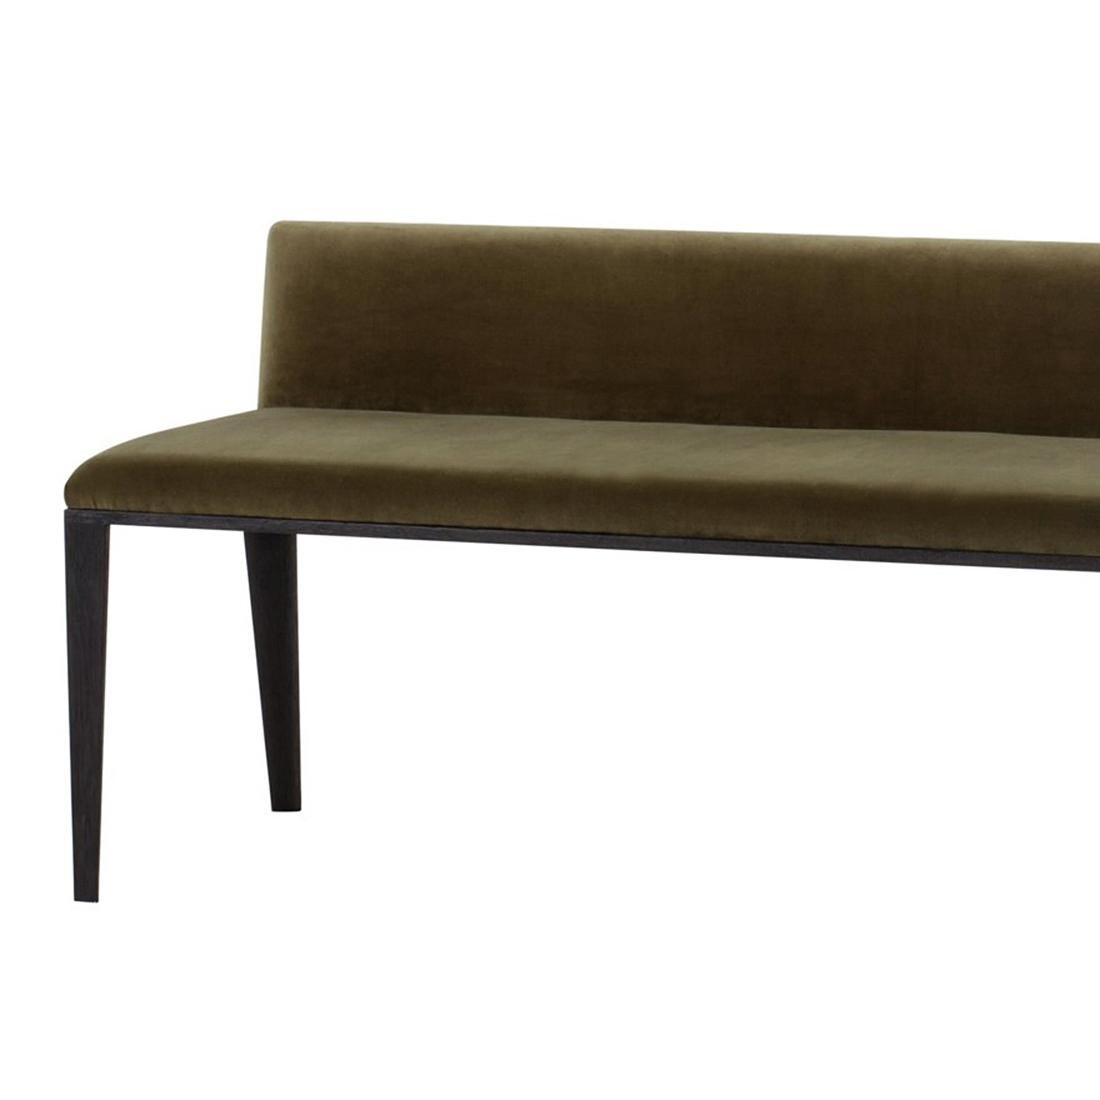 Bench Oliver with structure in solid
oakwood, seat and back upholstered
and covered with kaki velvet fabric.
With blackened oakwood base and feet.
Also available in Oliver chair.